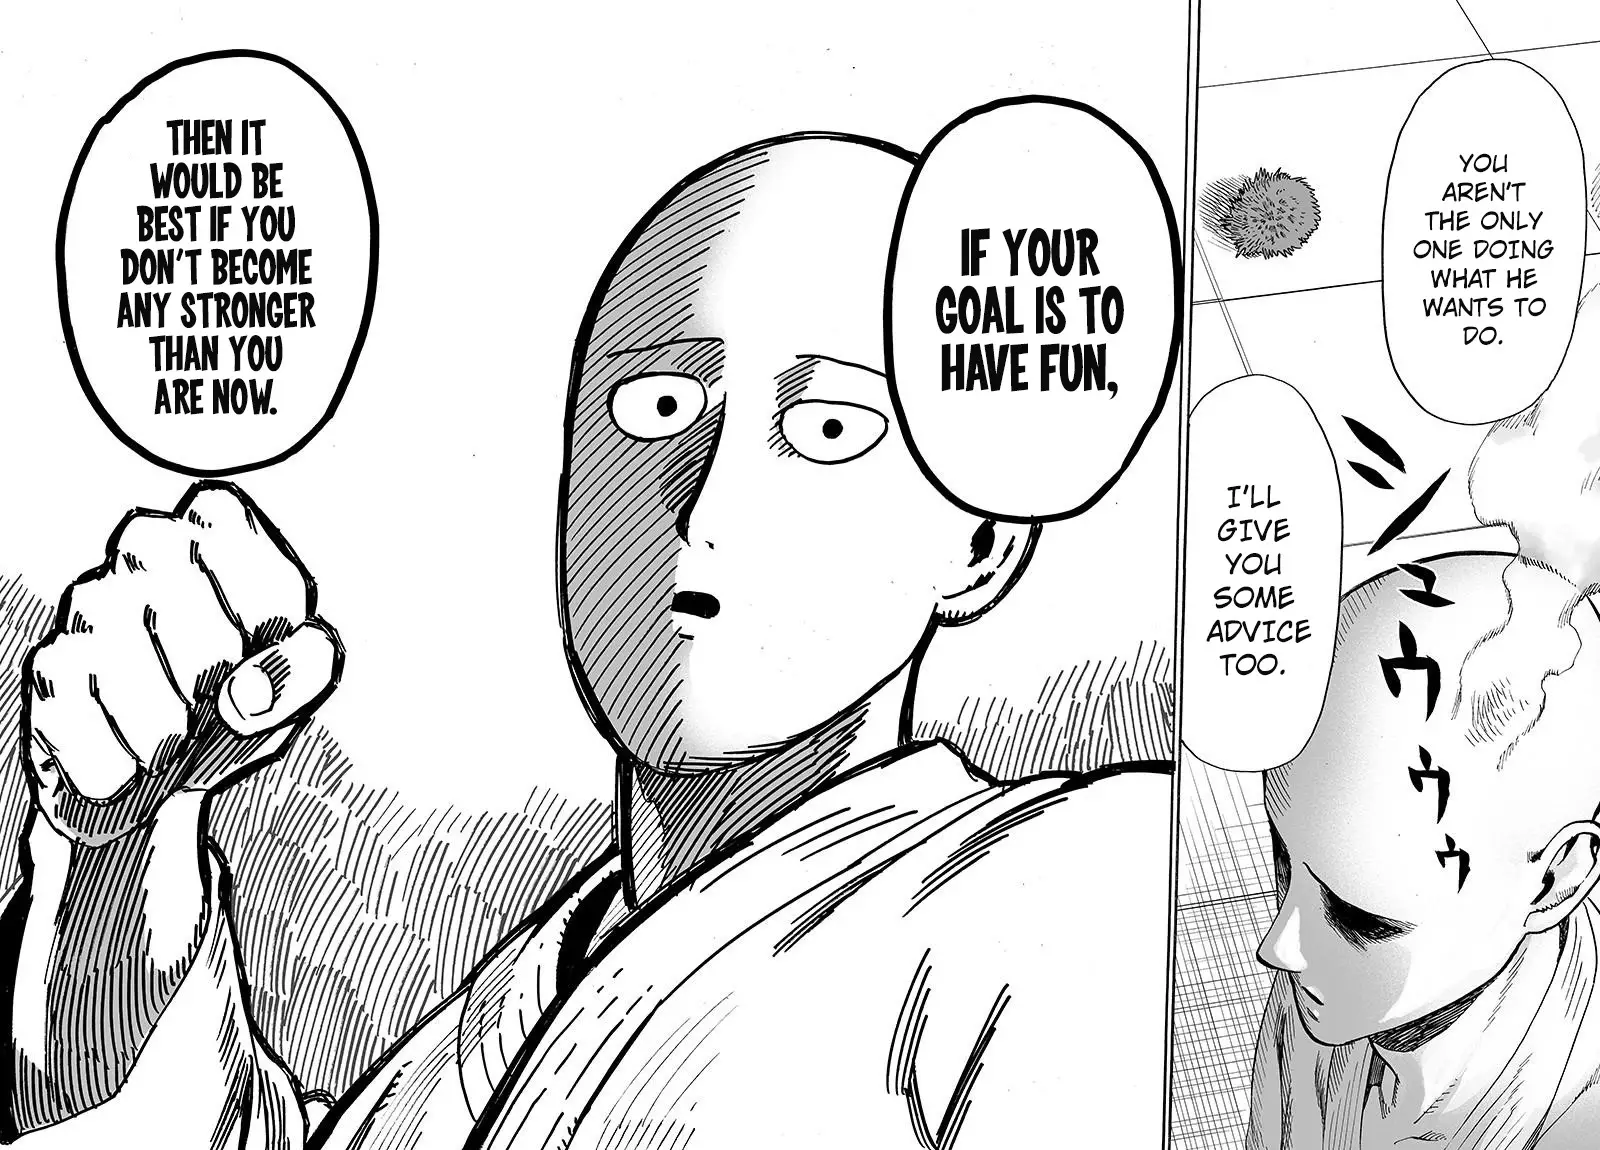 One Punch Man Chapter 70, READ One Punch Man Chapter 70 ONLINE, lost in the cloud genre,lost in the cloud gif,lost in the cloud girl,lost in the cloud goods,lost in the cloud goodreads,lost in the cloud,lost ark cloud gaming,lost odyssey cloud gaming,lost in the cloud fanart,lost in the cloud fanfic,lost in the cloud fandom,lost in the cloud first kiss,lost in the cloud font,lost in the cloud ending,lost in the cloud episode 97,lost in the cloud edit,lost in the cloud explained,lost in the cloud dog,lost in the cloud discord server,lost in the cloud desktop wallpaper,lost in the cloud drawing,can't find my cloud on network,lost in the cloud characters,lost in the cloud chapter 93 release date,lost in the cloud birthday,lost in the cloud birthday art,lost in the cloud background,lost in the cloud banner,lost in the clouds meaning,what is the black cloud in lost,lost in the cloud ao3,lost in the cloud anime,lost in the cloud art,lost in the cloud author twitter,lost in the cloud author instagram,lost in the cloud artist,lost in the cloud acrylic stand,lost in the cloud artist twitter,lost in the cloud art style,lost in the cloud analysis